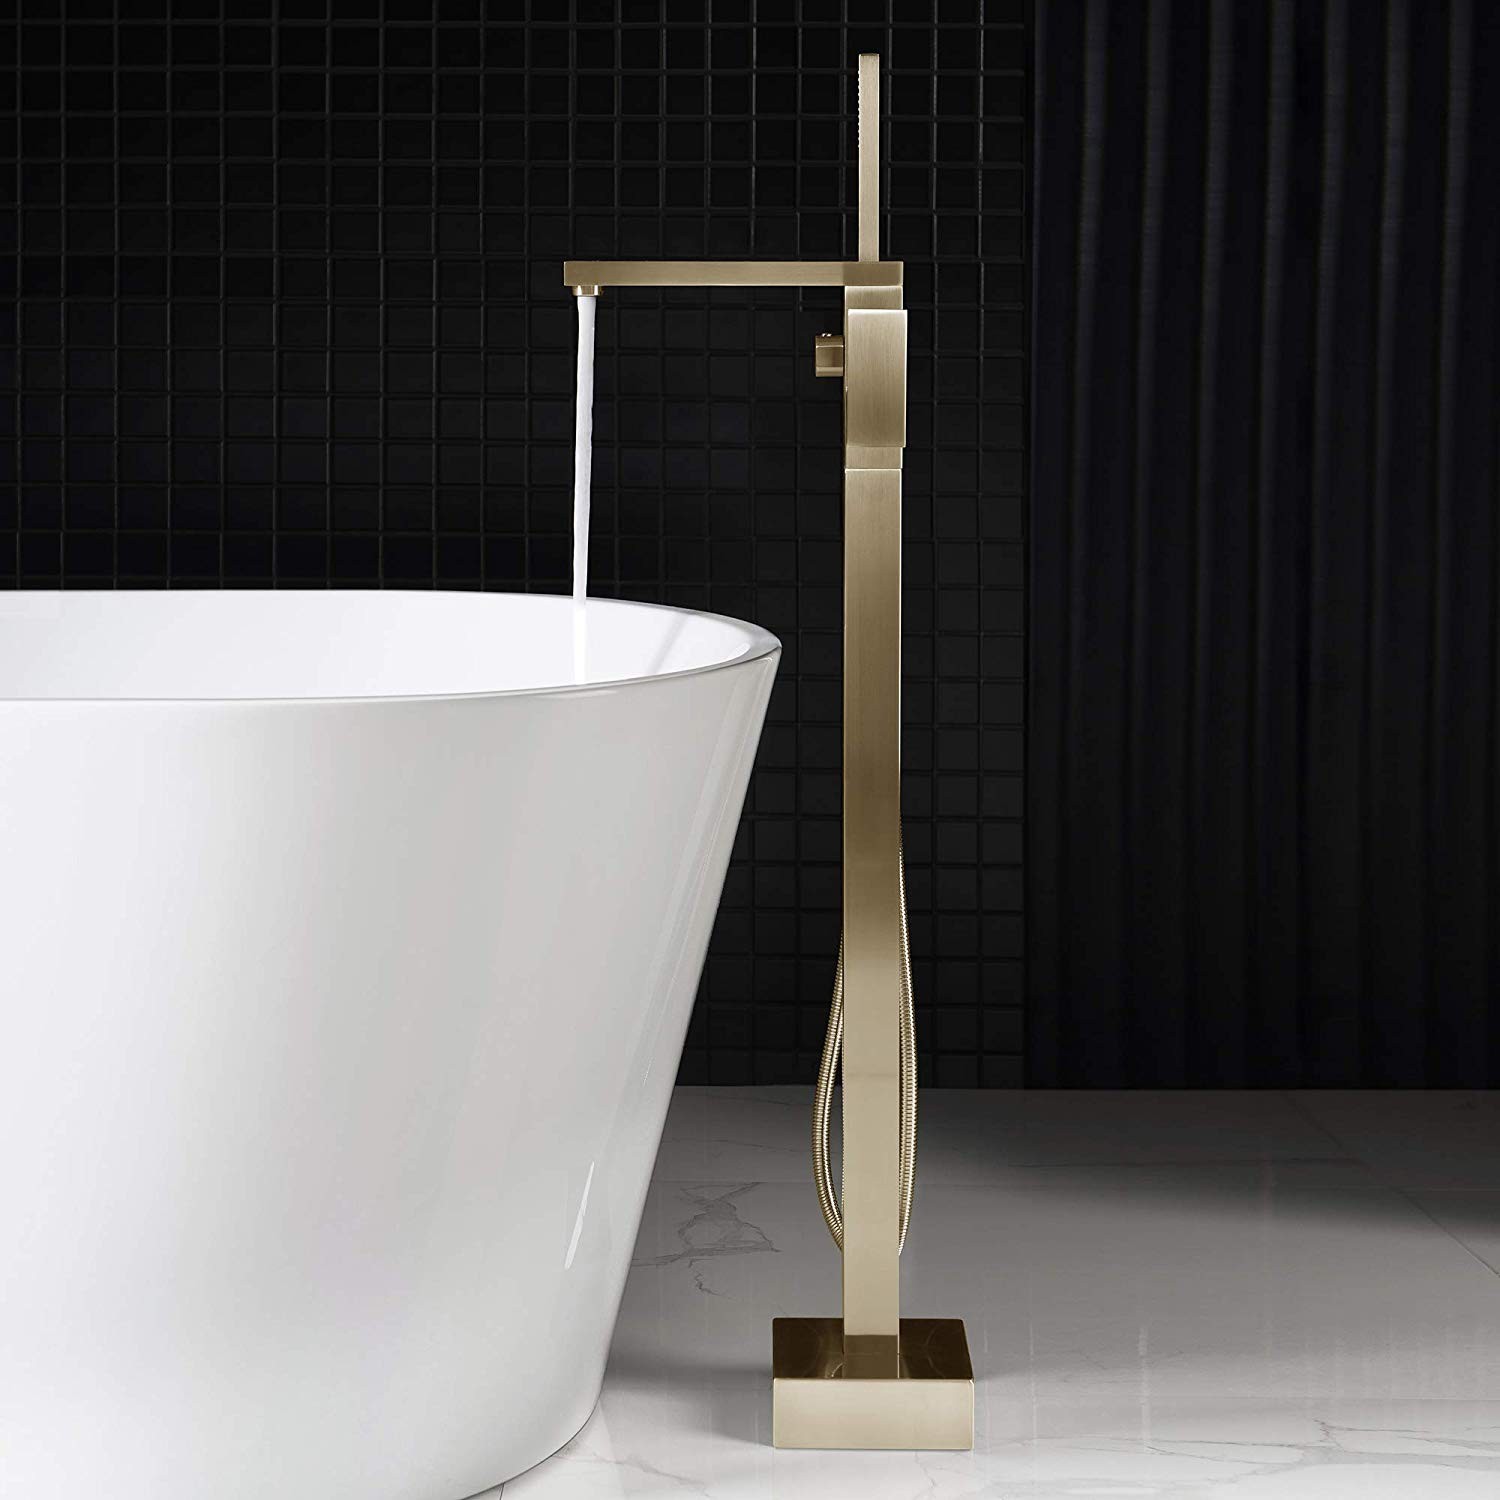  WOODBRIDGE F0008BG Contemporary Single Handle Floor Mount Freestanding Tub Filler Faucet with Hand shower in Brushed Gold Finish._10008